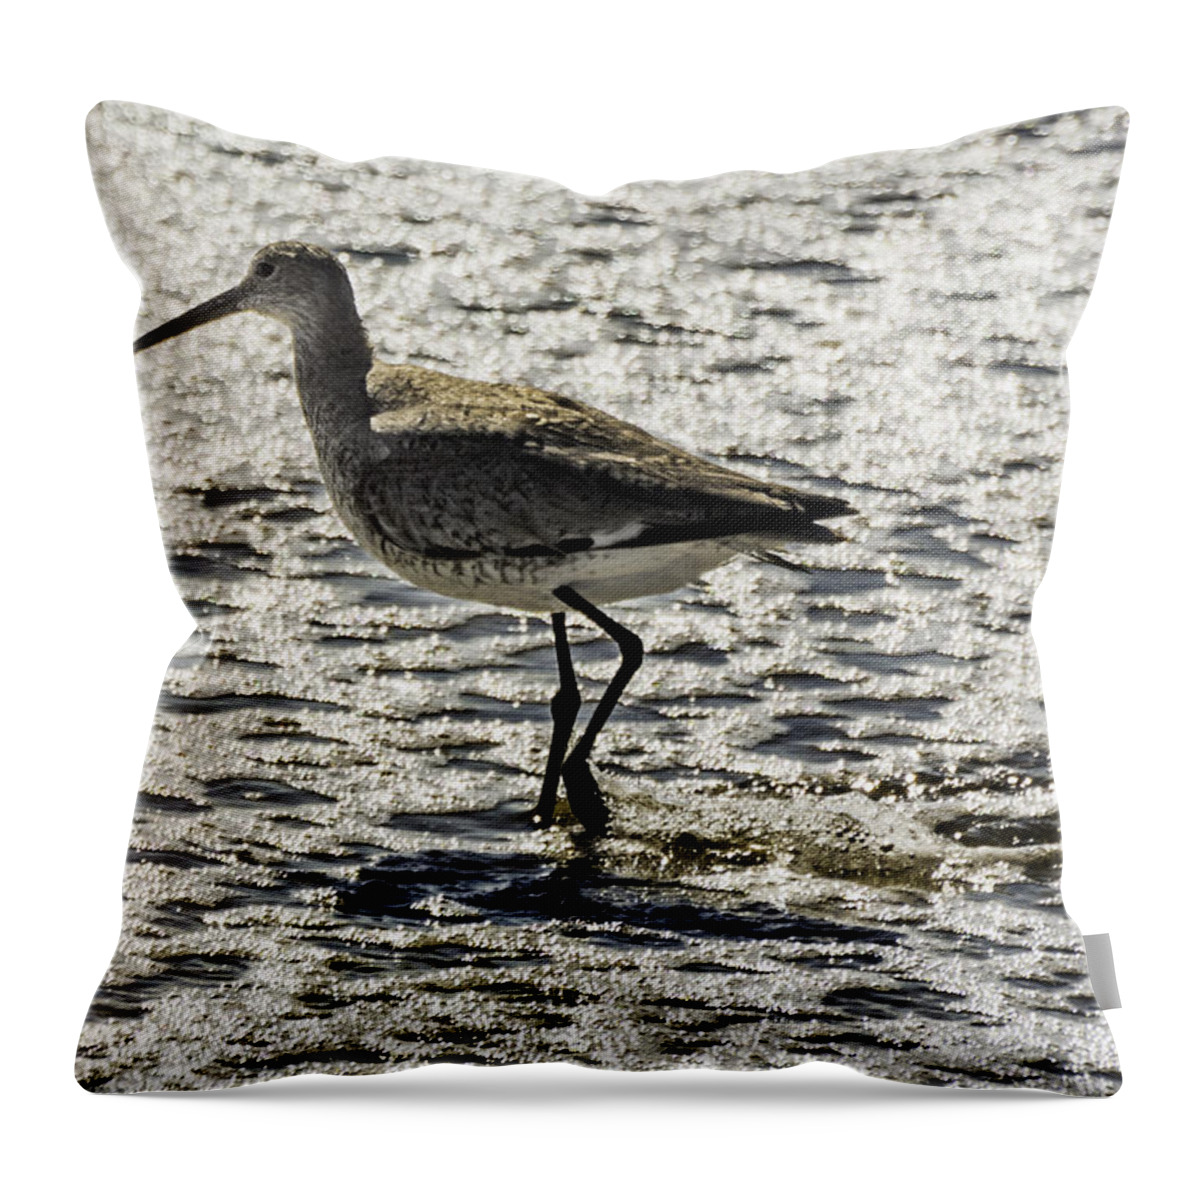 Original Throw Pillow featuring the photograph Sandpiper by WAZgriffin Digital